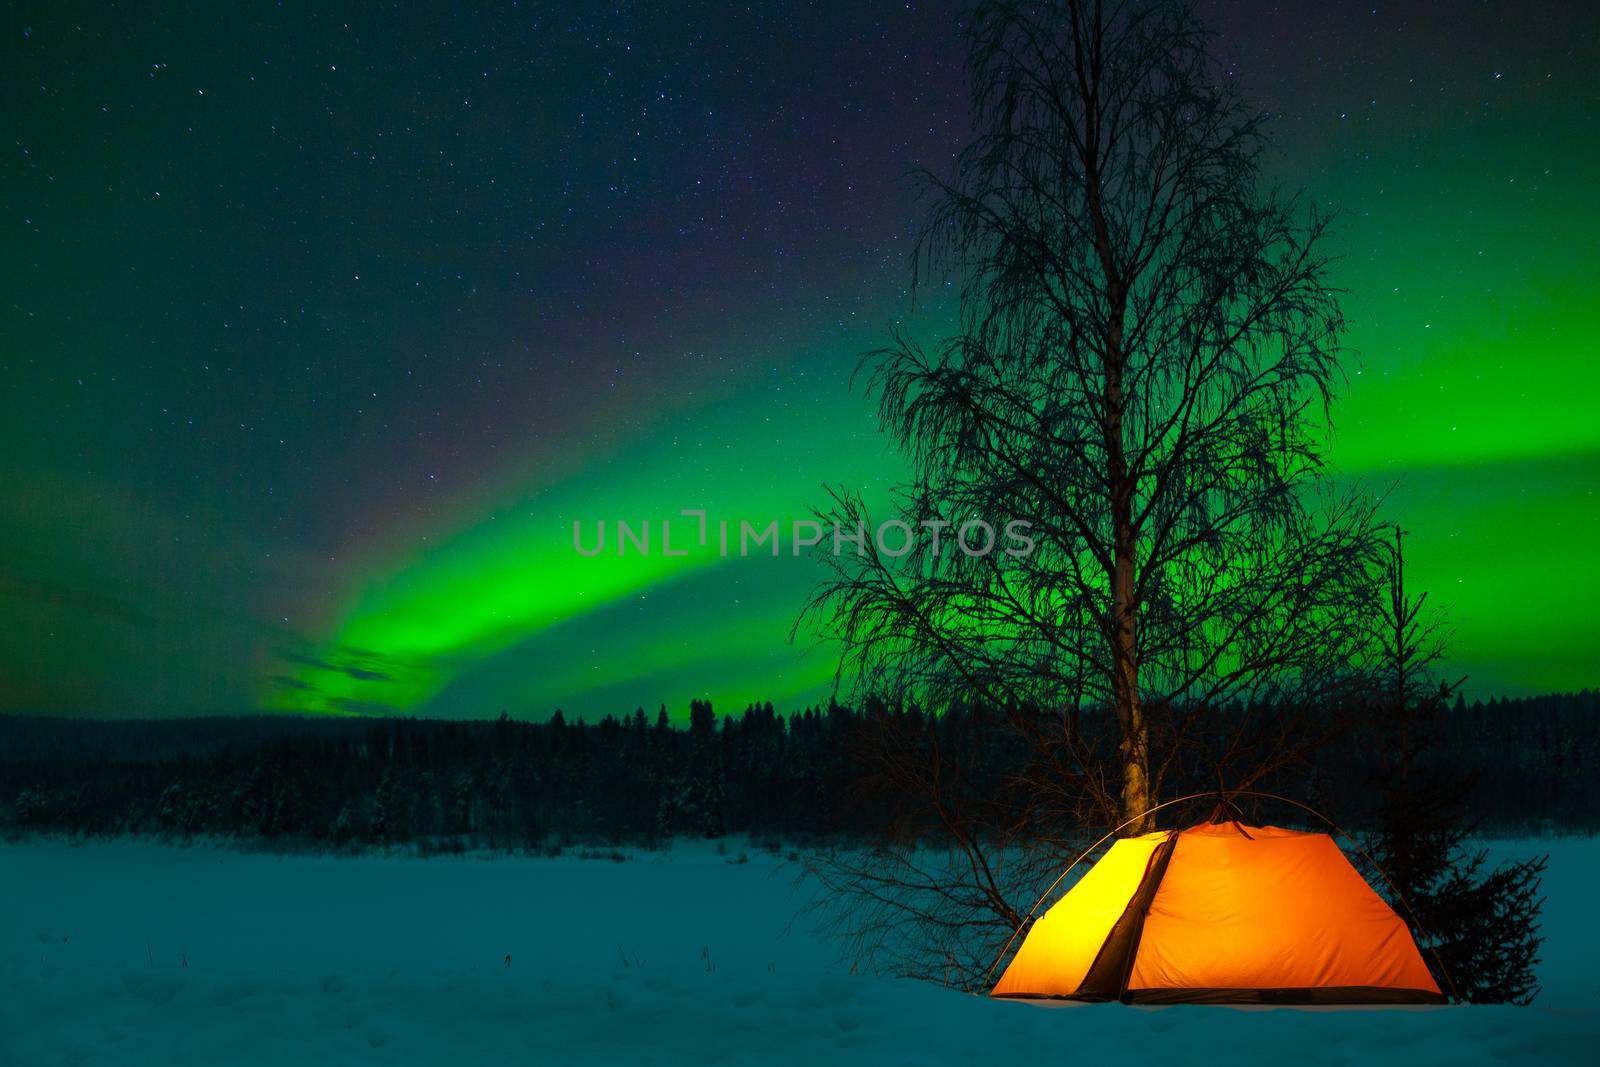 Camping in the north with the northern lights overhead - Aurora Borealis